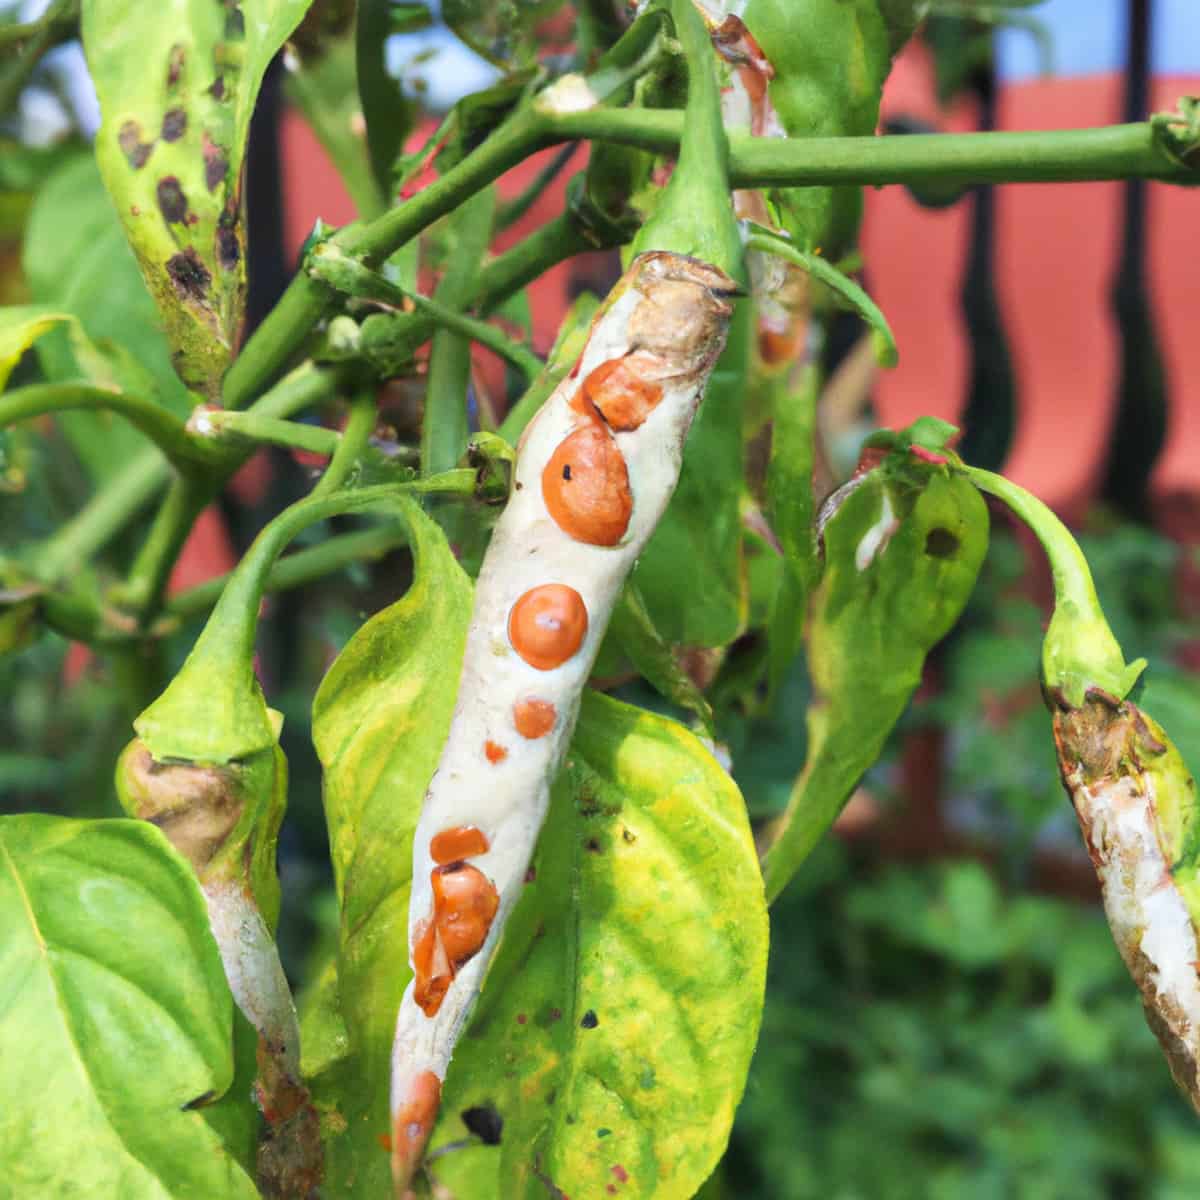 How to Control Fungal Diseases of Chili Pepper